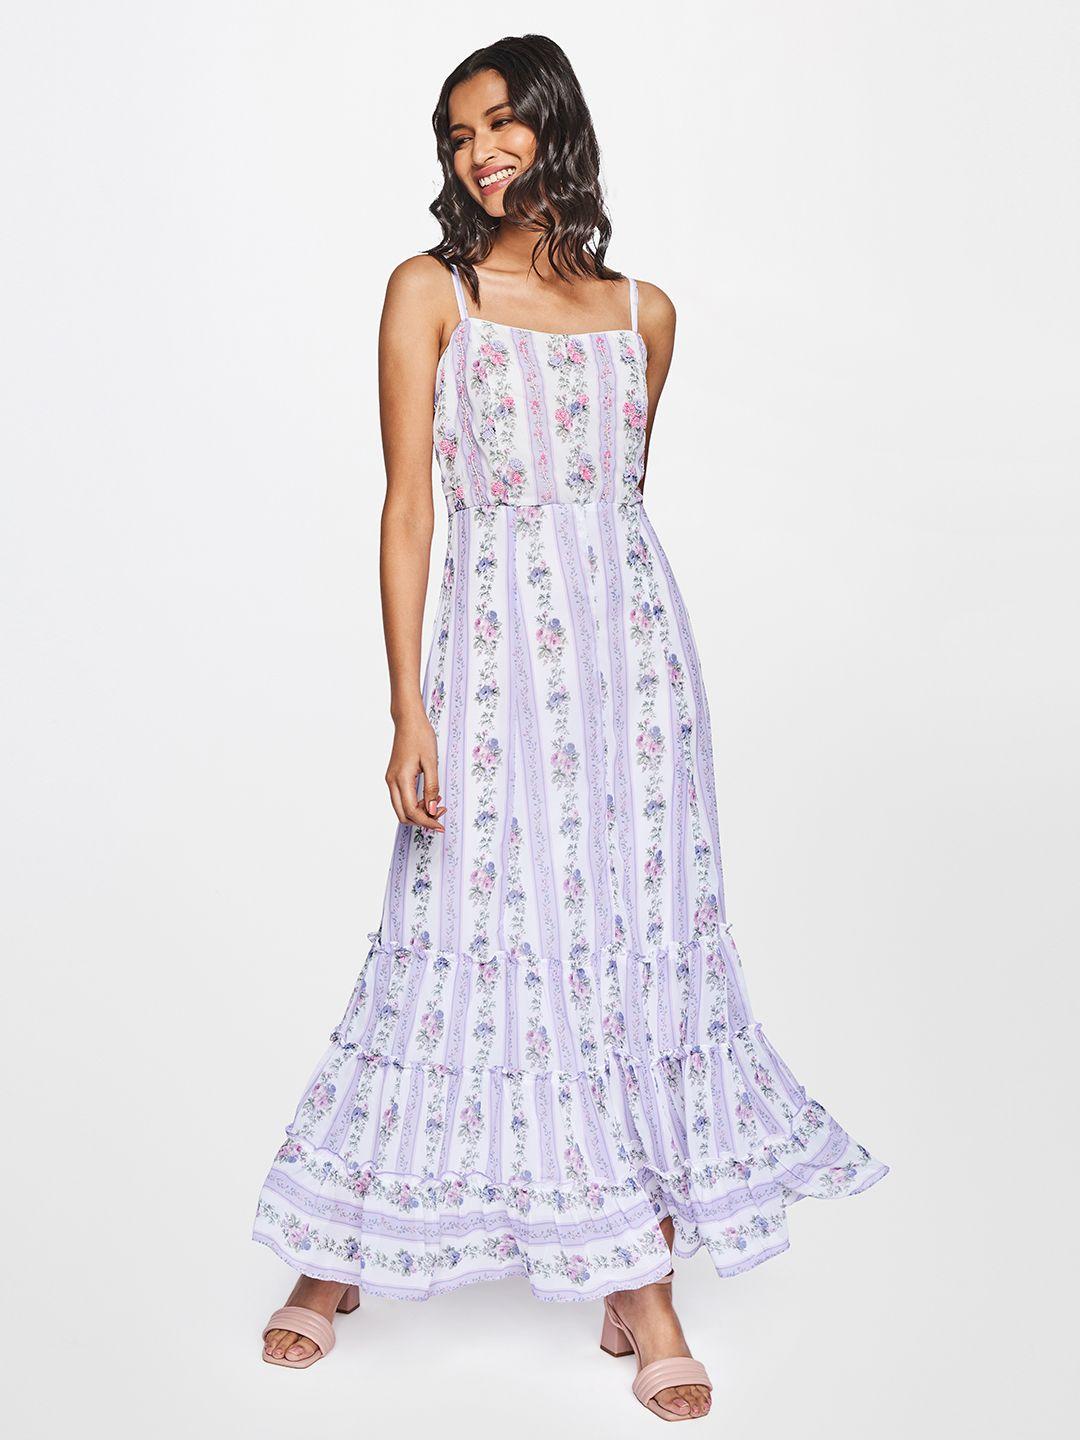 and-white-floral-maxi-dress